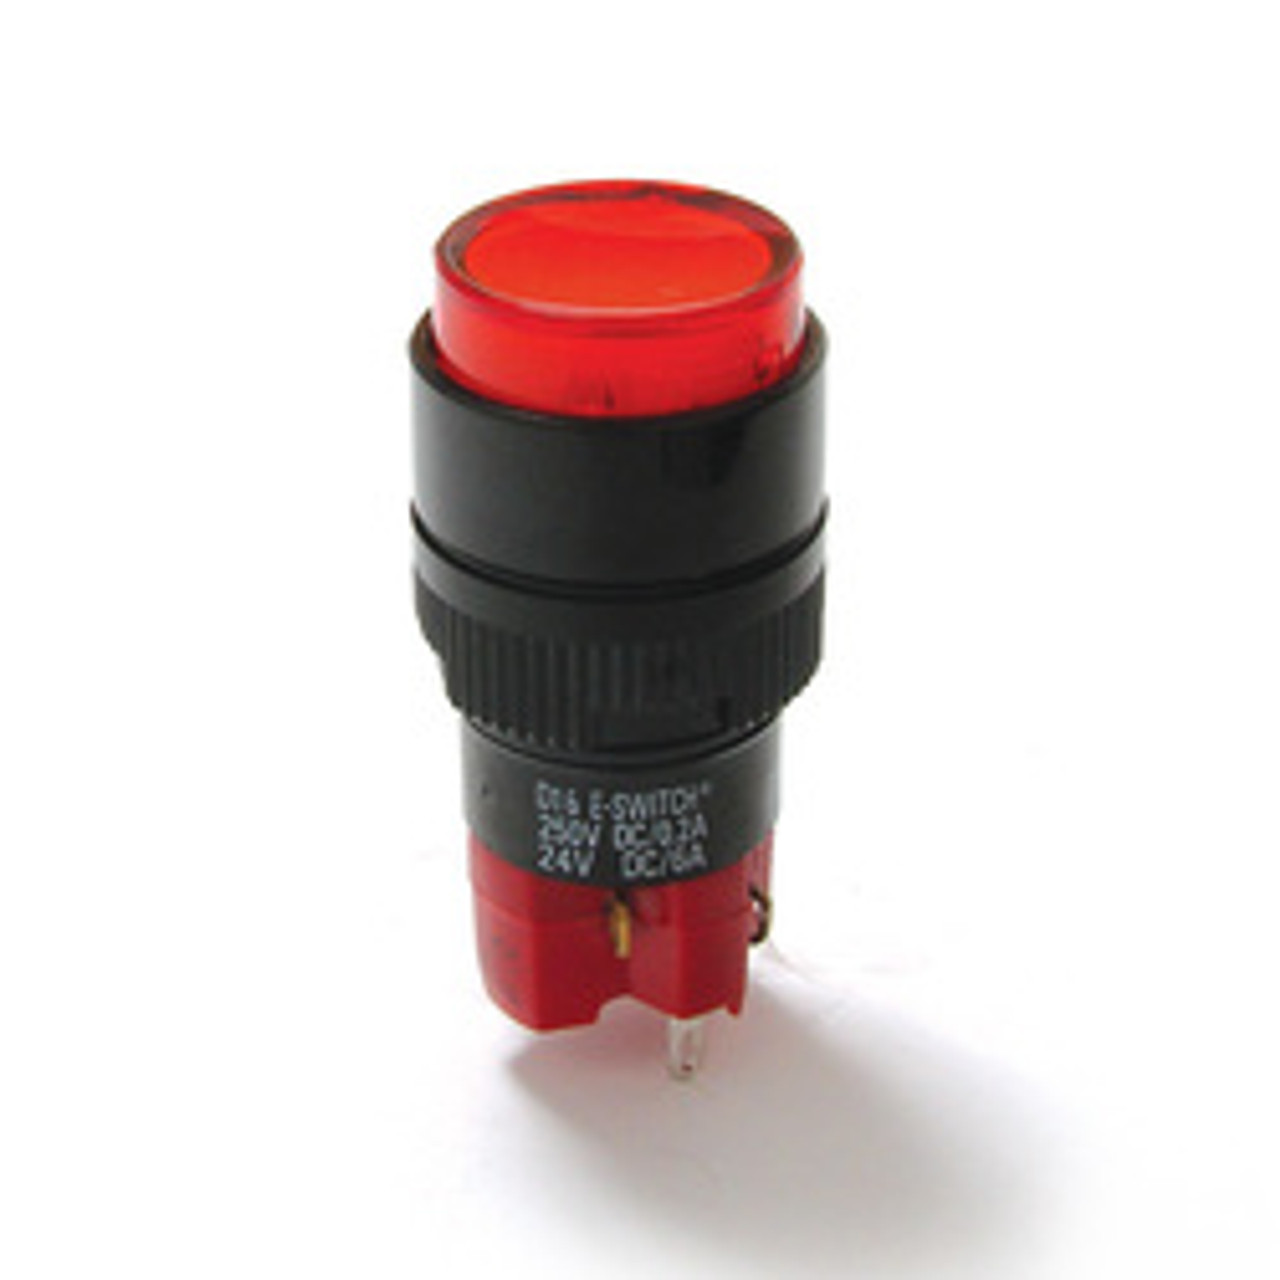 E-Switch D16EES13 Pushbutton Switches